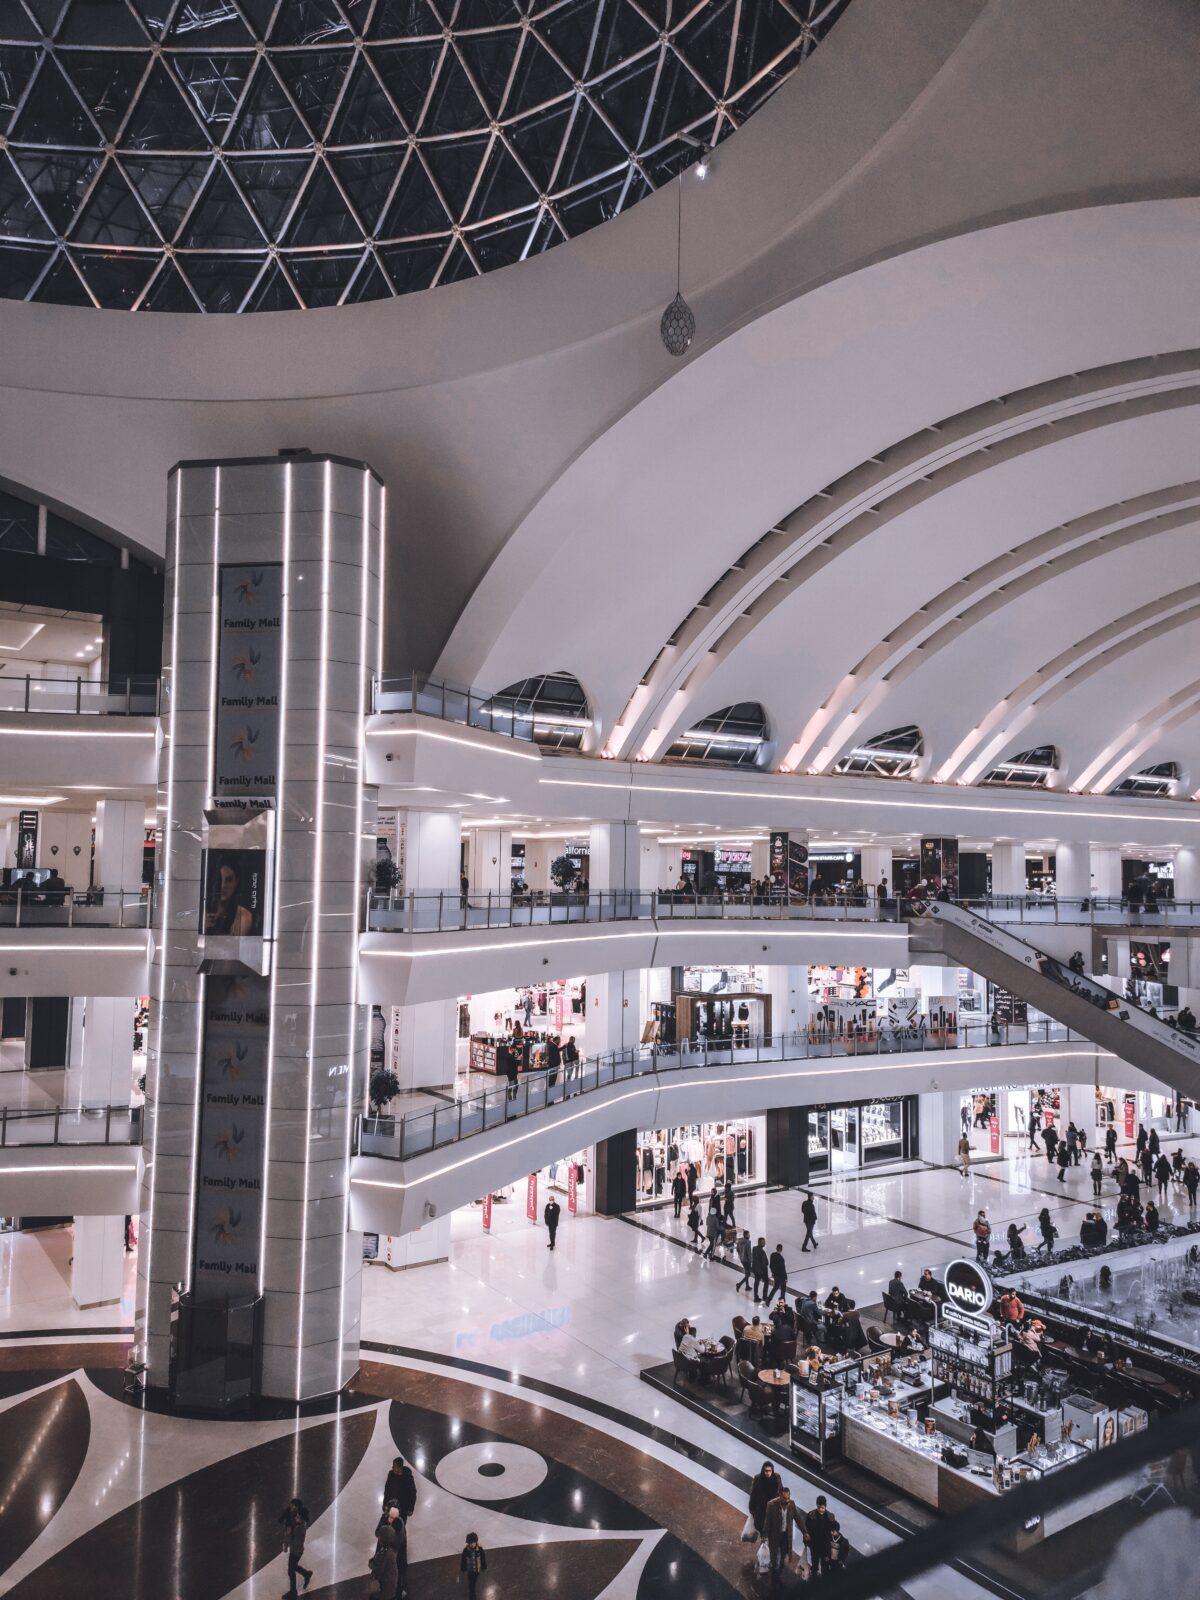 Where Have all the Shopping Malls Gone?